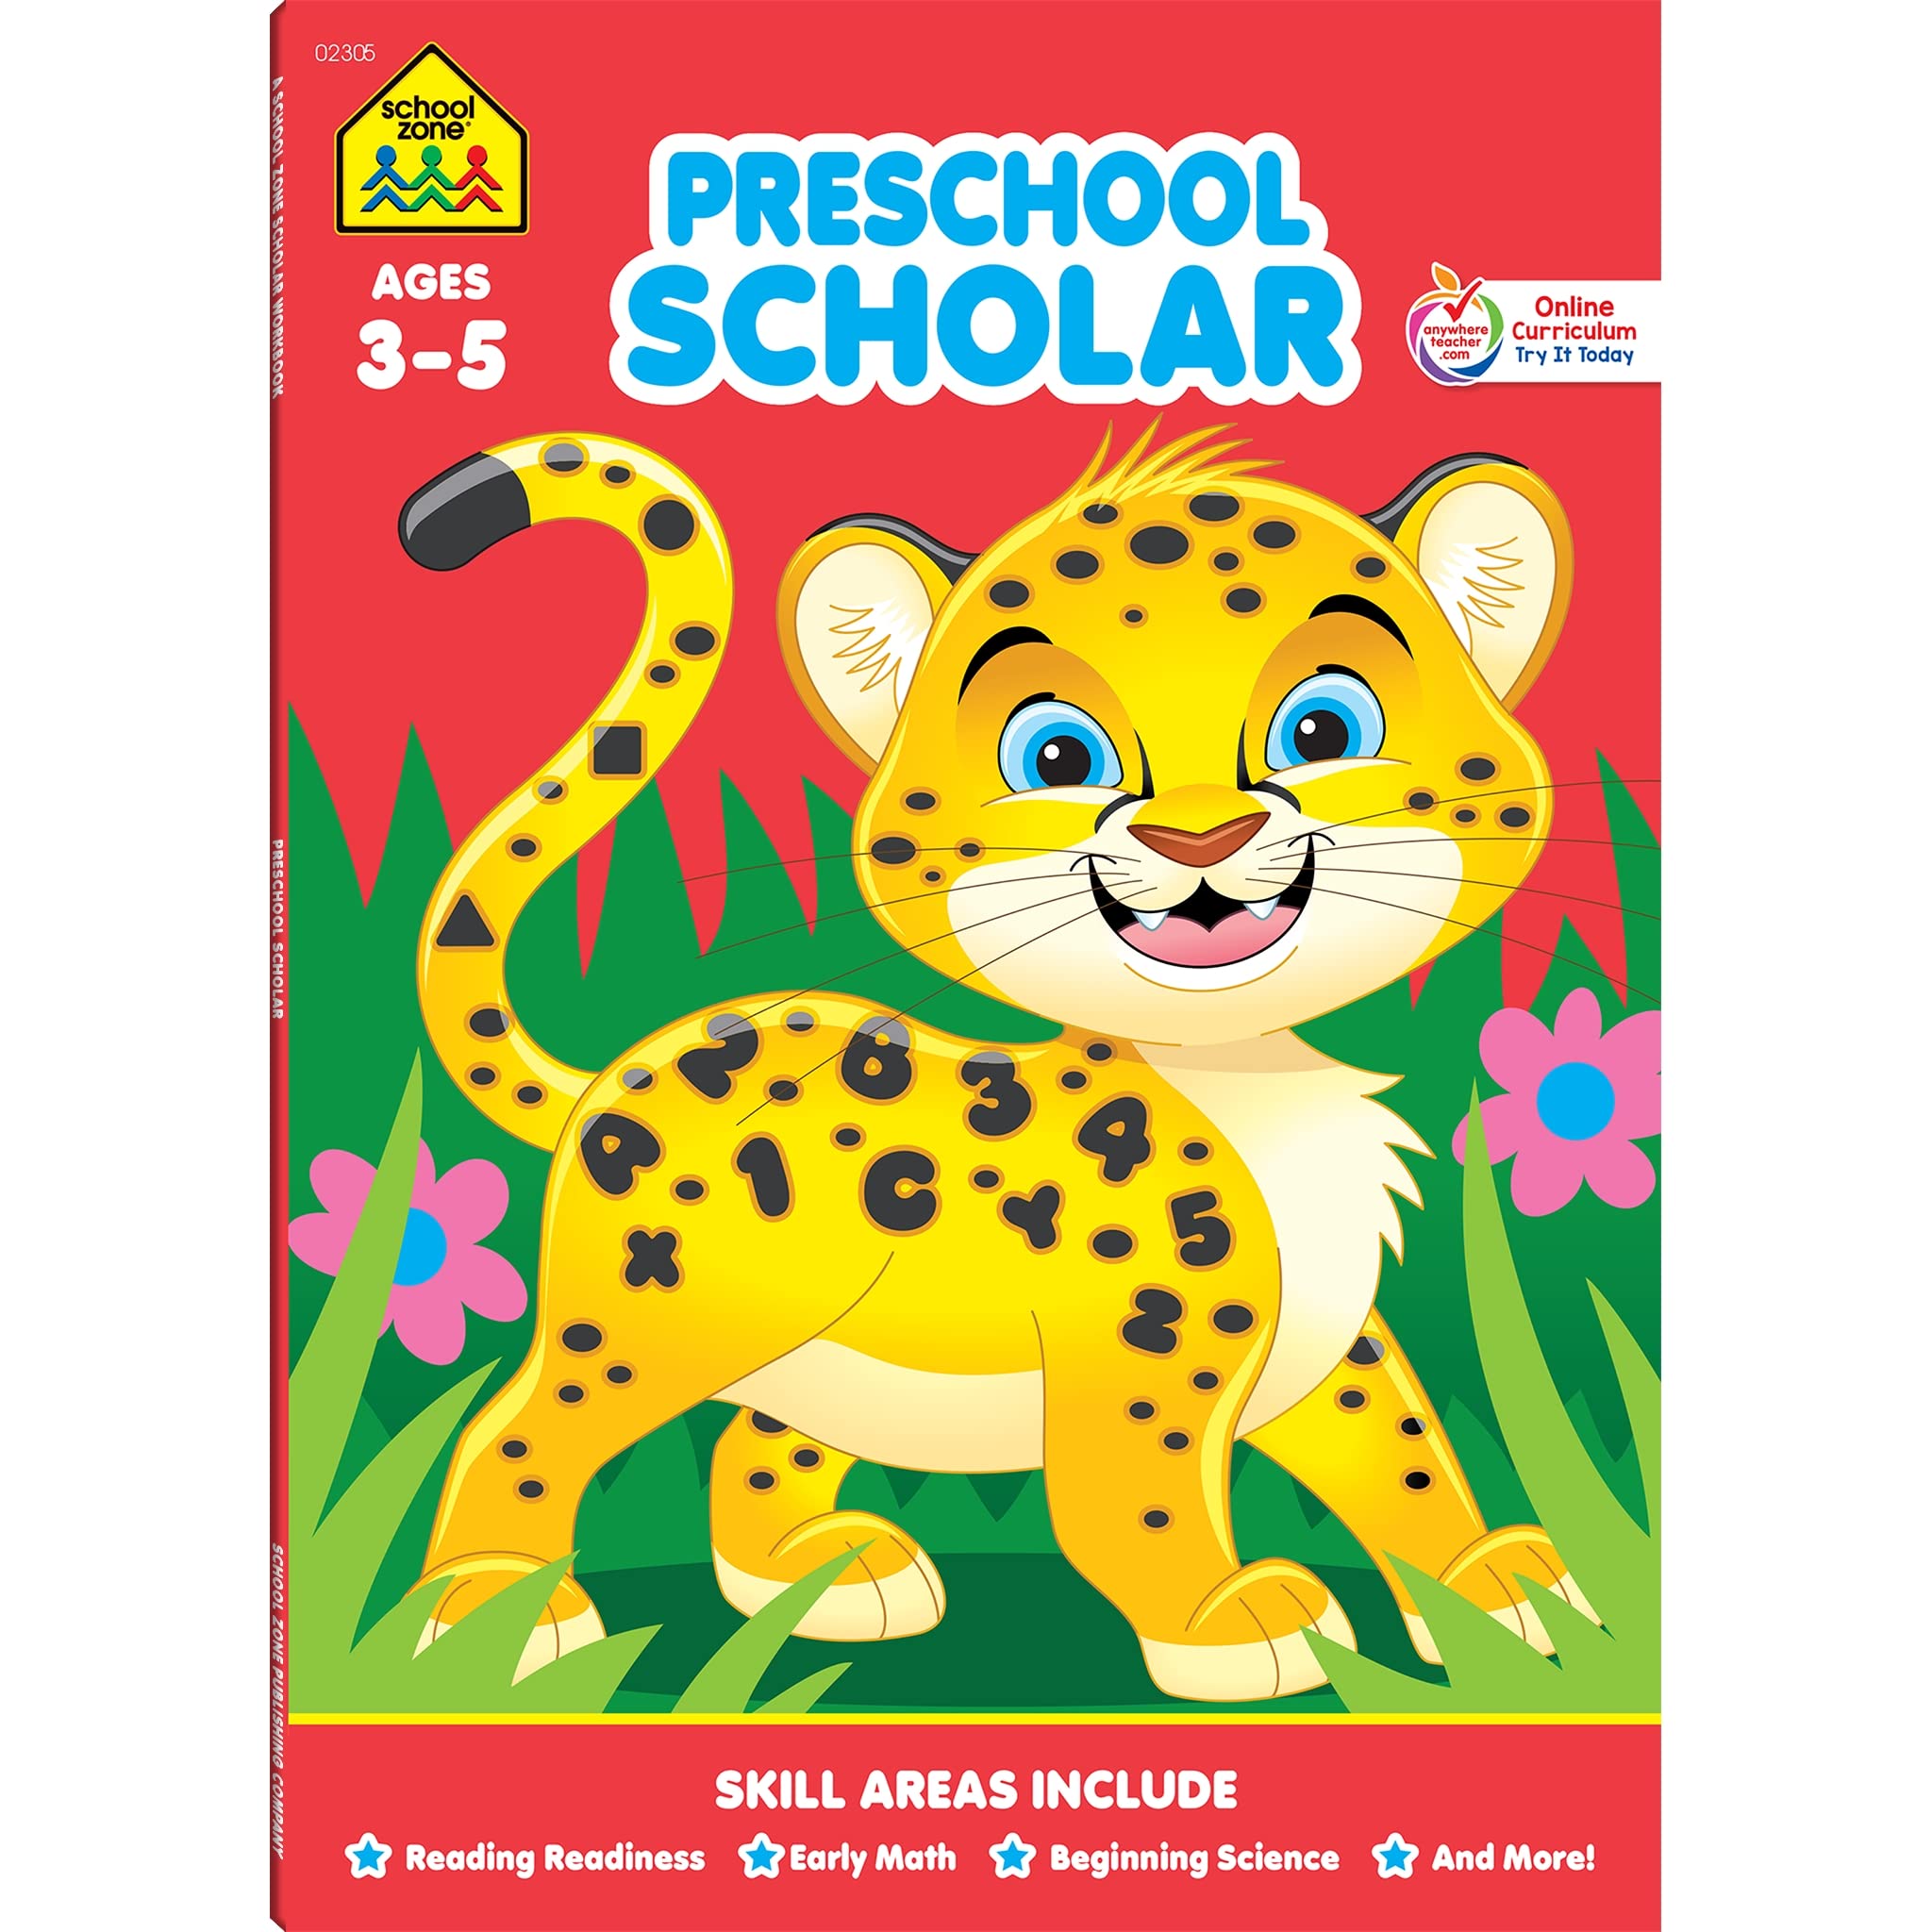 School Zone - Preschool Scholar Workbook - 64 Pages, Ages 3 to 5, Preschool to Kindergarten, Reading Readiness, Early Math, Science, ABCs, Writing, and More